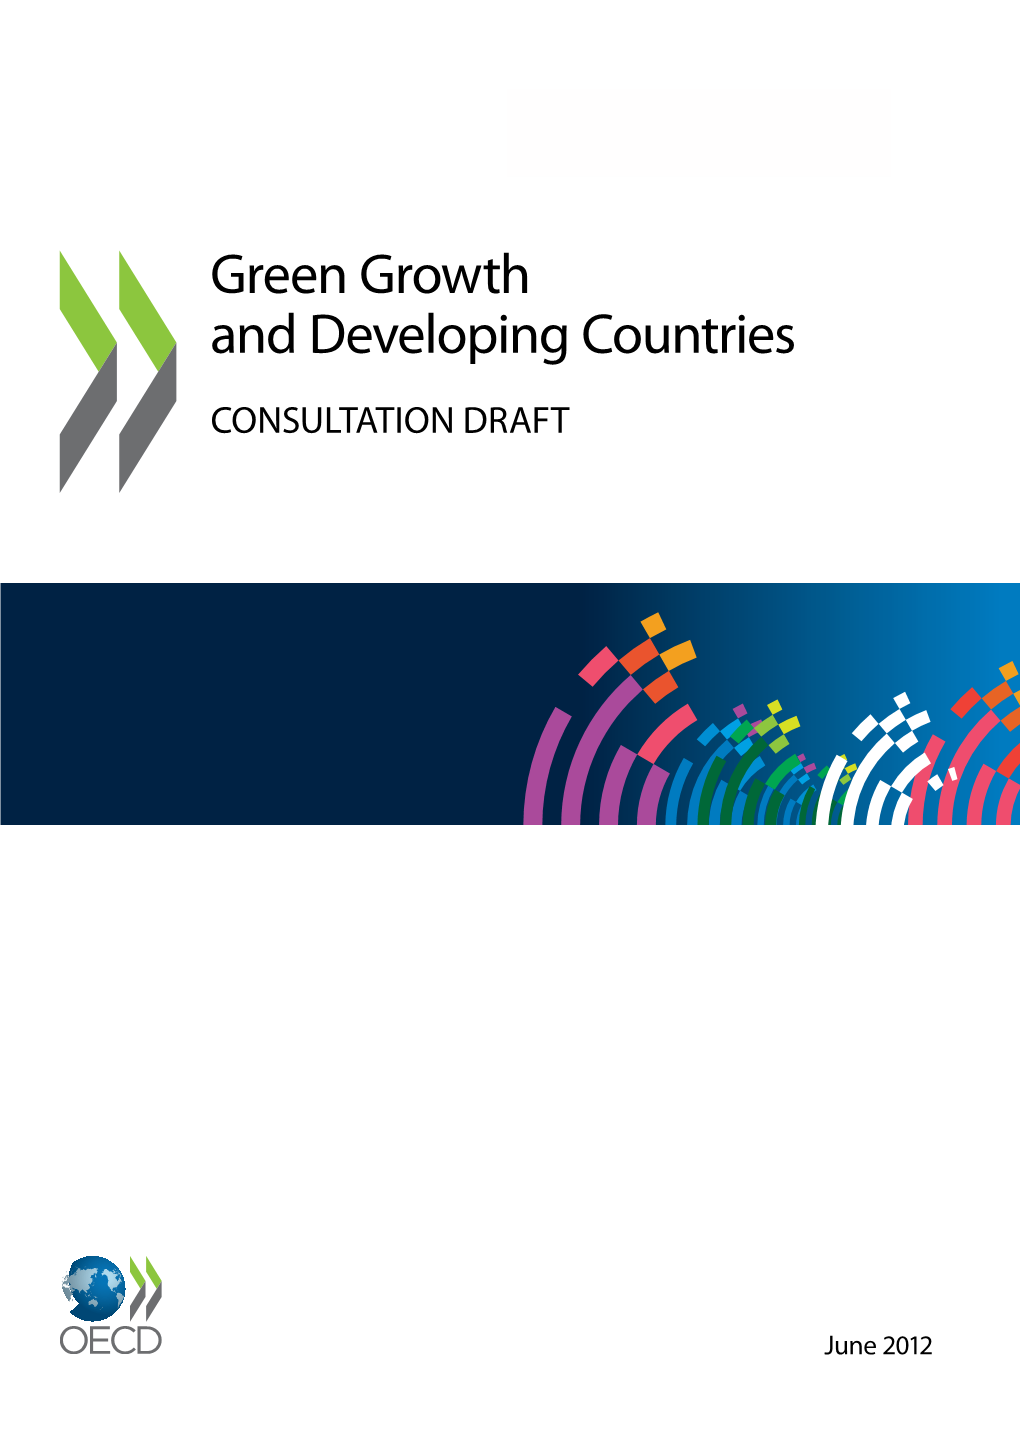 Green Growth and Developing Countries CONSULTATION DRAFT